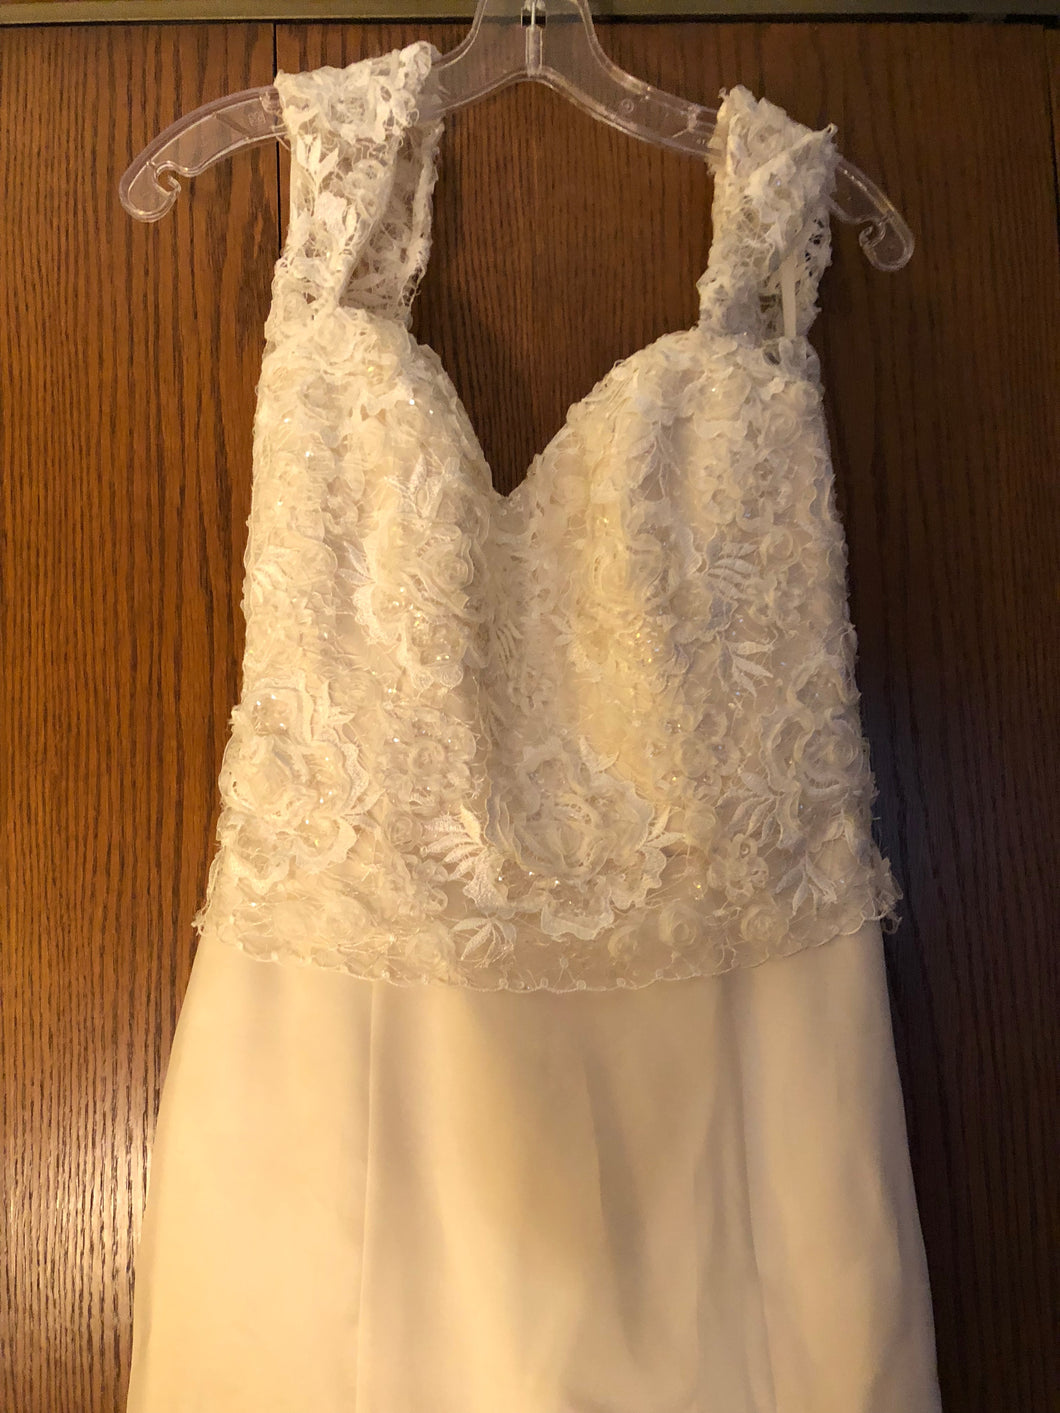 Exquisite Bride 'Portia' size 10 new wedding dress front view close up on hanger